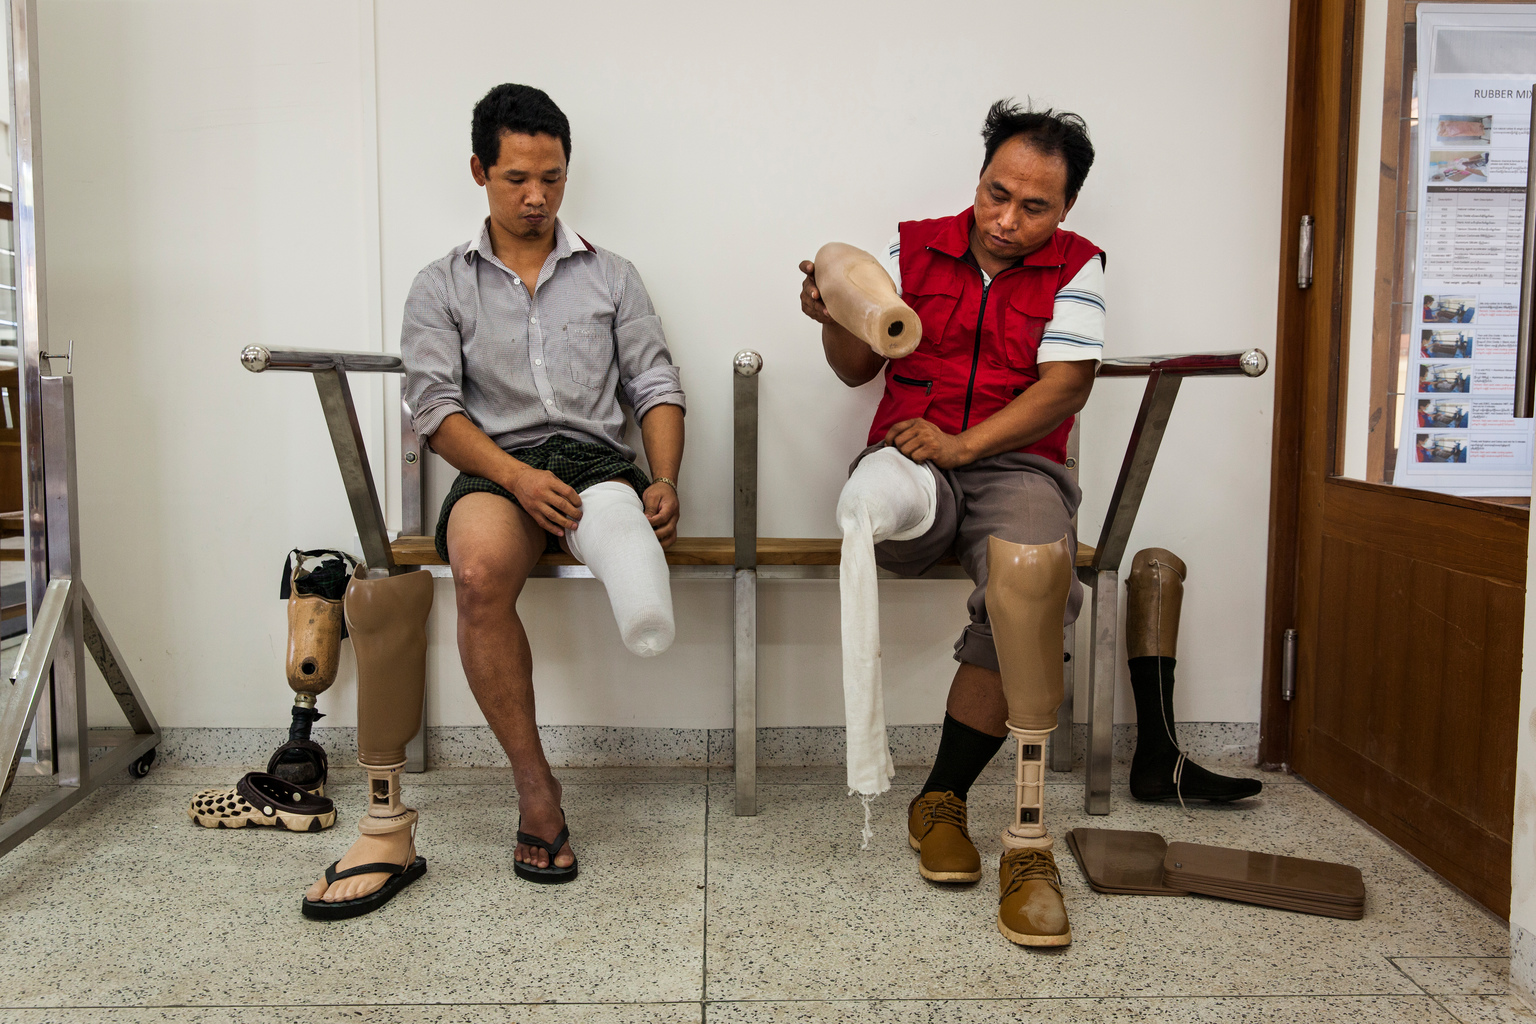 Aung Soe Min, 42, (right) who was injured in 2011 as a Myanmar Armed Forces soldier demining in Kayin State and (left) Daung Ja, 33 who was injured 2010 laying landmines while fighting with the Kachin Independence Army, at newly-opened physical rehabilitation centre in Myitkyina, Kachin State, Myanmar, Friday 31 March 2017. The centre is the first of its kind in norther Myanmar and was opened following an investment of 1.98 billion Myanmar Kyats (1.5 million US dollars) by the International Committee of the Red Cross (ICRC). In 2017, working with the Government of Myanmar, UNICEF will strive to meet the basic needs of the most vulnerable internally displaced children. Myanmar is experiencing three protracted humanitarian crises, each with its own set of complex underlying factors. In Rakhine State, inter-communal violence that erupted in 2012 continues to plague 120,000 internally displaced people spread across 40 camps or informal sites, as well as host communities. Eighty per cent of the displaced are women and children. In Kachin State, armed conflict that reignited in 2011 continues to impact communities caught in the crossfire between an ethnic armed group and the Myanmar army. Nearly 87,000 people remain displaced as a result, including 40 per cent who are in areas outside of government control. An additional 11,000 people remain displaced in northern Shan State, where a similar conflict broke out in 2011. Compounding the protracted crises are issues related to religious and/or ethnic discrimination, exploitation, chronic poverty, vulnerability to natural disasters, statelessness, trafficking and humanitarian access. In addition to the humanitarian crises in Rakhine, Kachin and Shan states, Myanmar is impacted by humanitarian situations in other parts of the country, including natural disasters, health emergencies and small-scale displacements.